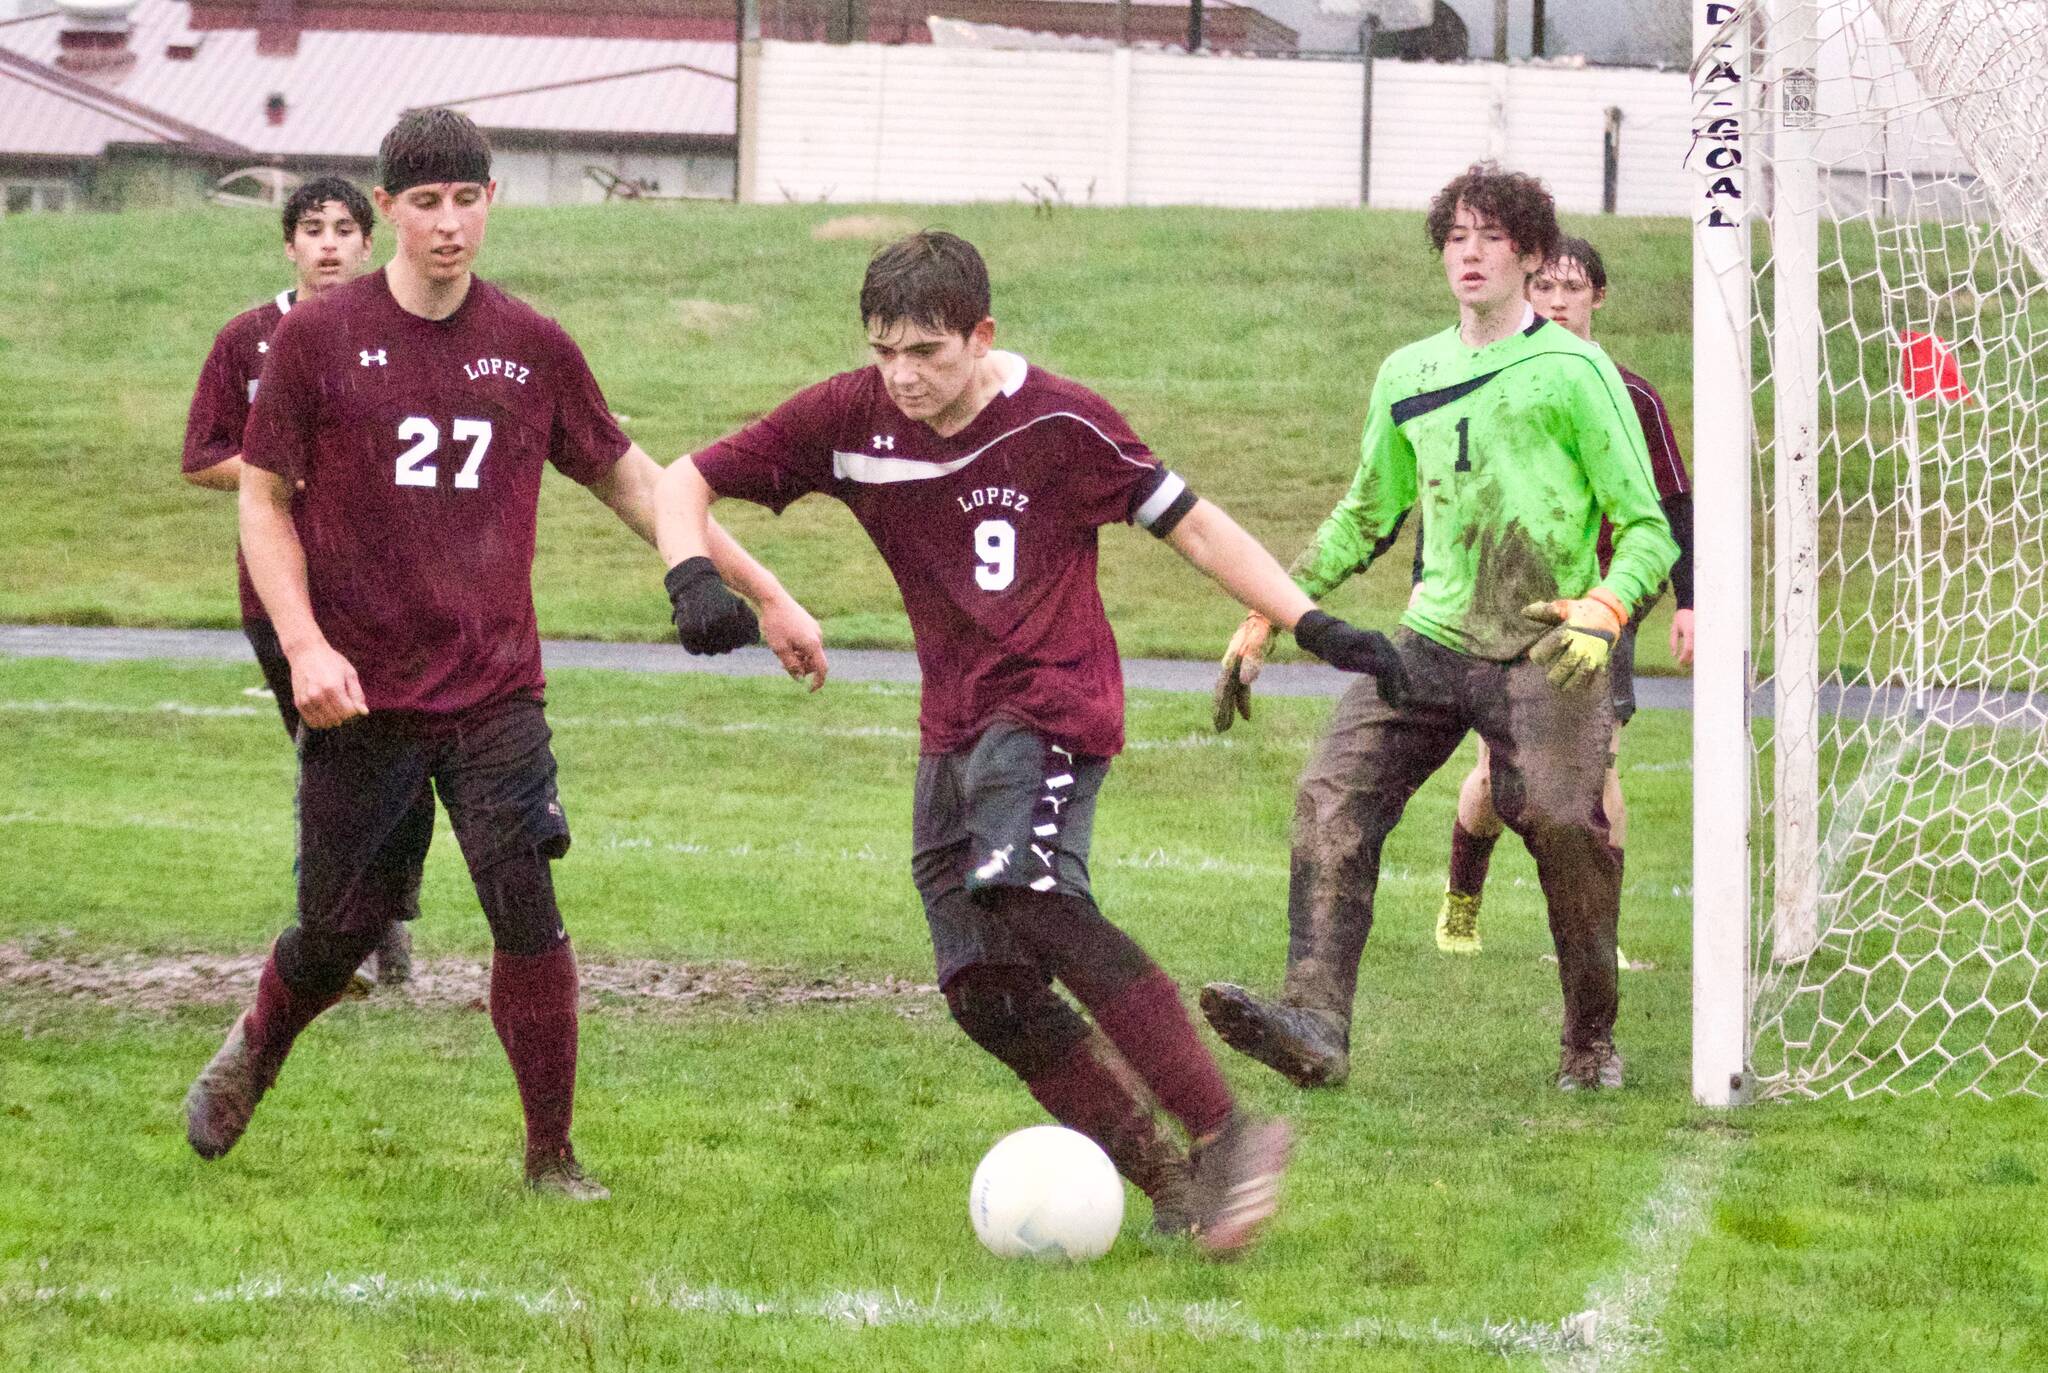 Contributed photo
Ananda Velo (9) clears the ball from in front of the Lopez goal as Josh Kramer (27) and keeper Levi McClerren (1) help defend against Mt. Vernon.